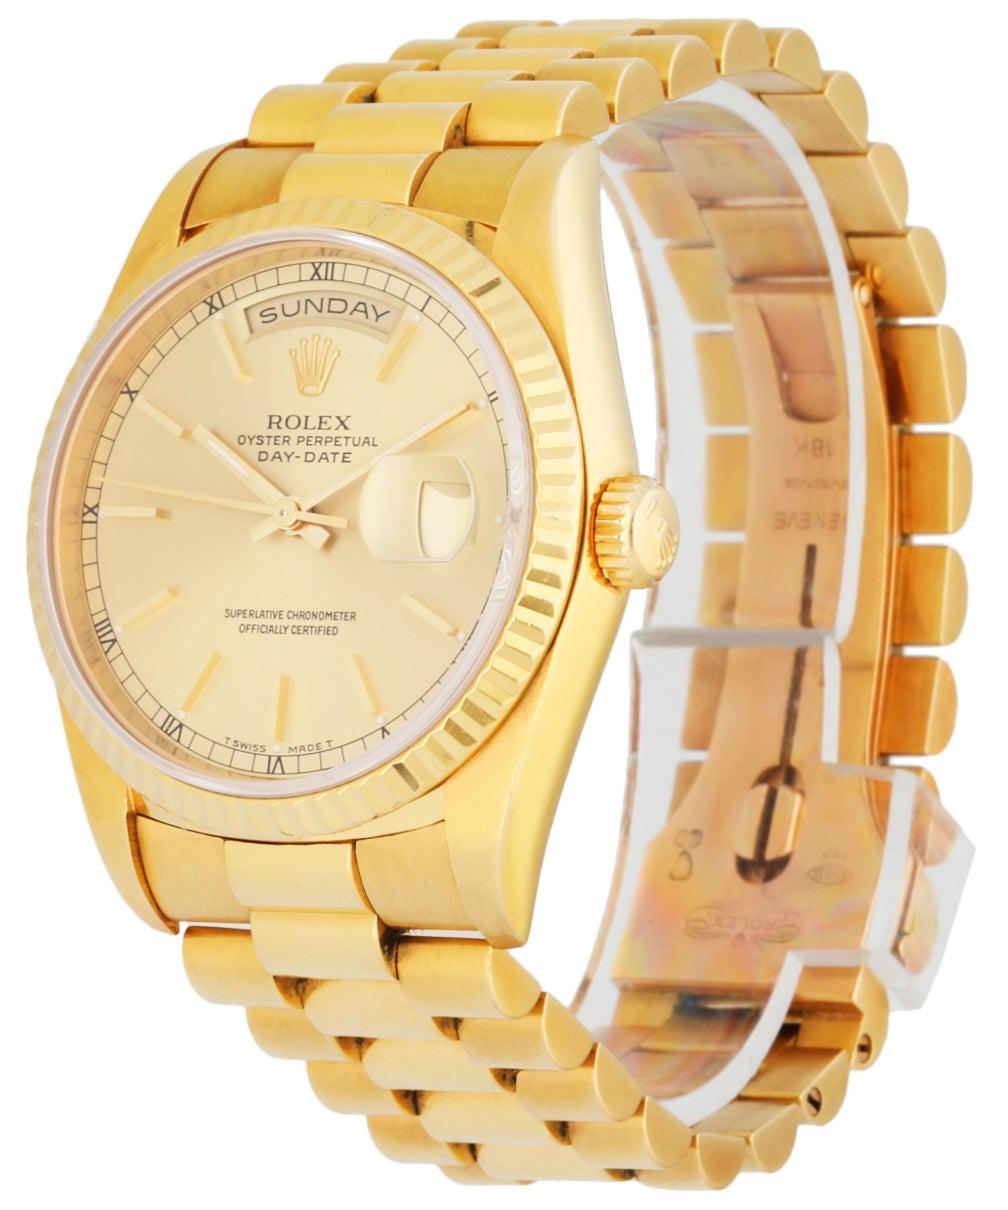 
Rolex Oyster Perpetual Day-Date President 18238 Men's Watch. 36mm 18k yellow gold case. 18k yellow gold fluted bezel. Champagne dial with gold hands and index hour marker. Day display at 12 o'clock. Date display at 3 o'clock. 18k yellow gold